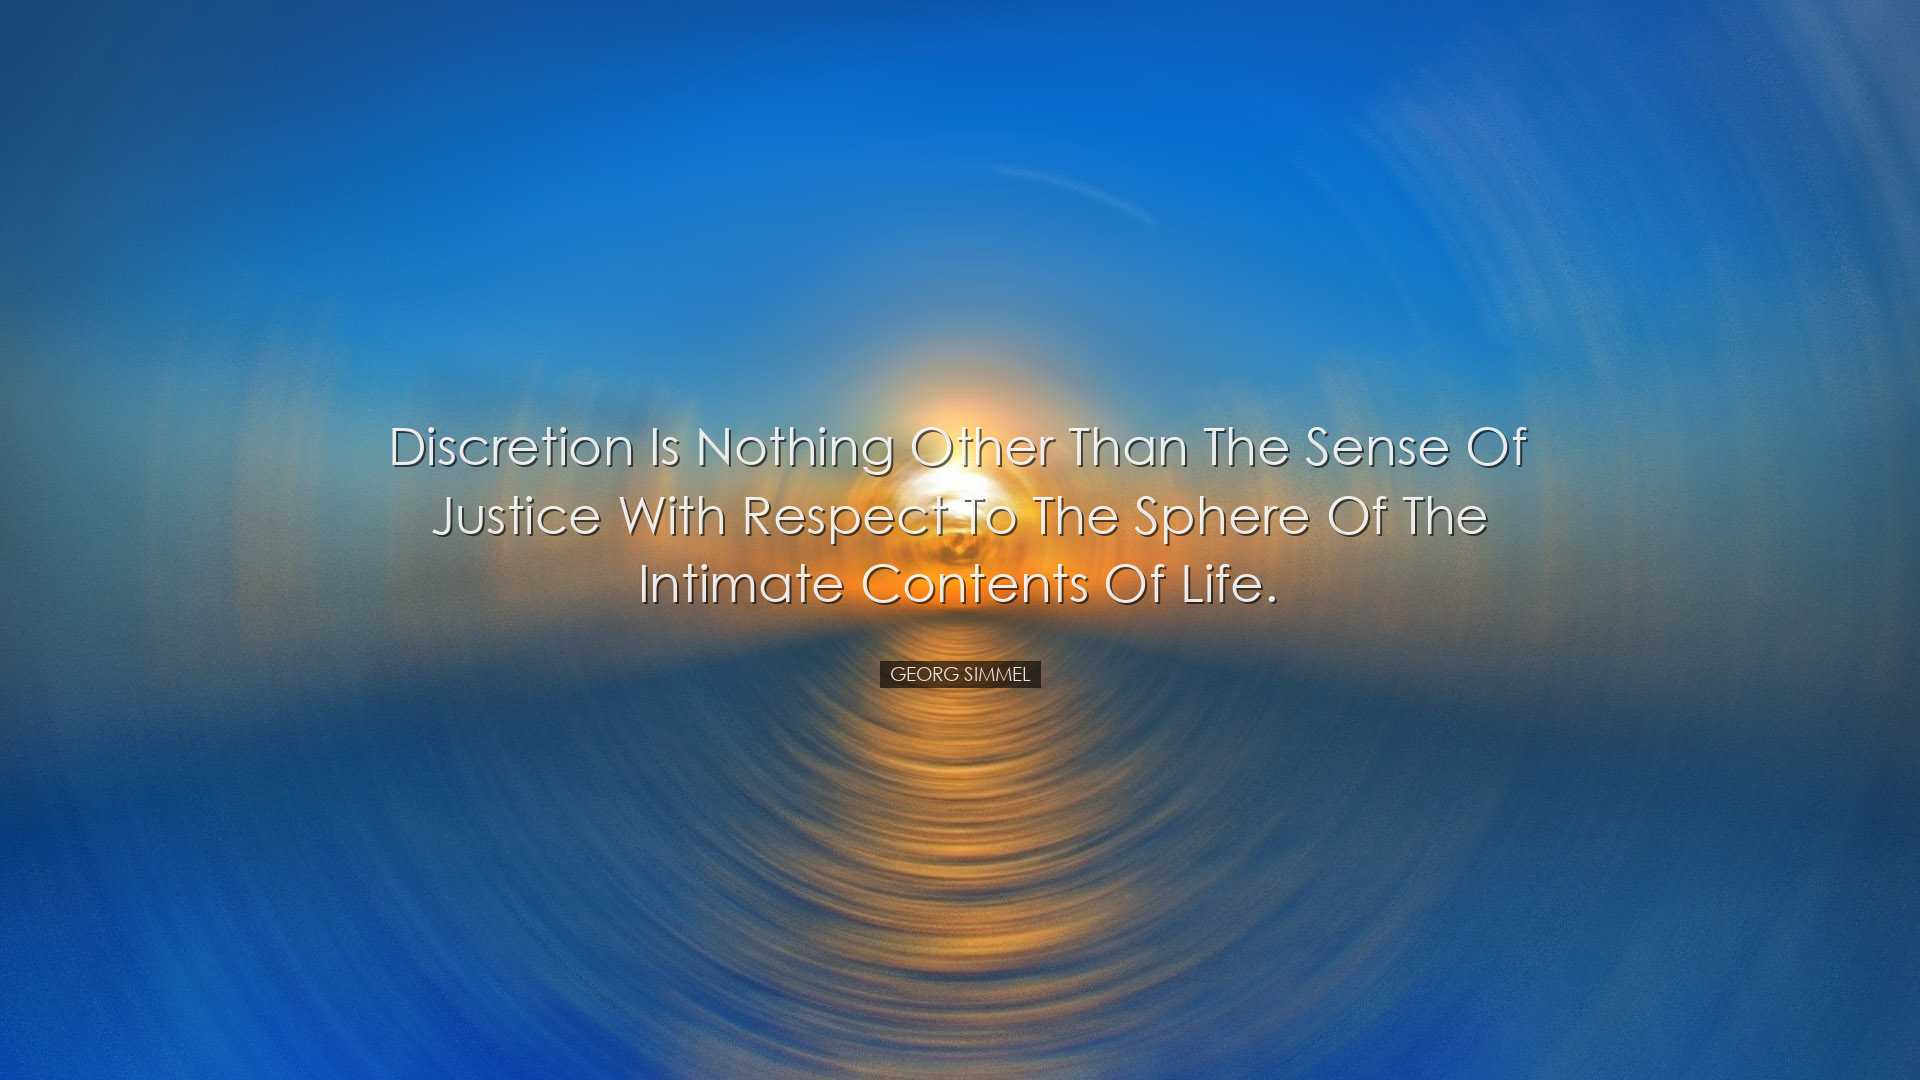 Discretion is nothing other than the sense of justice with respect